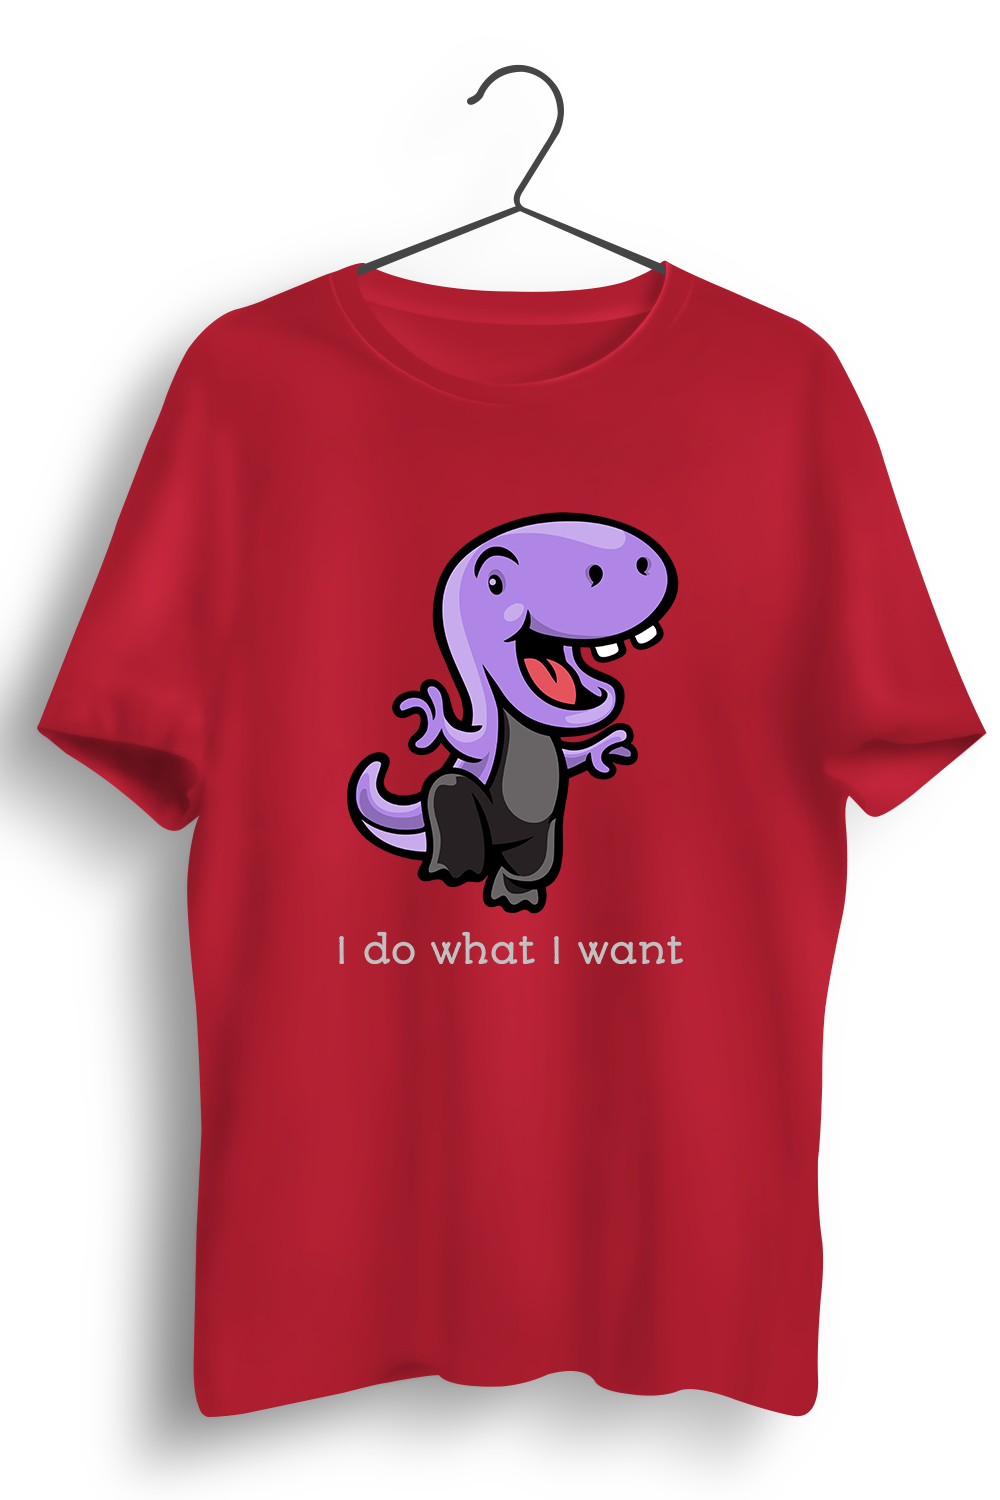 I Do What I Want Graphic Printed Red Tshirt